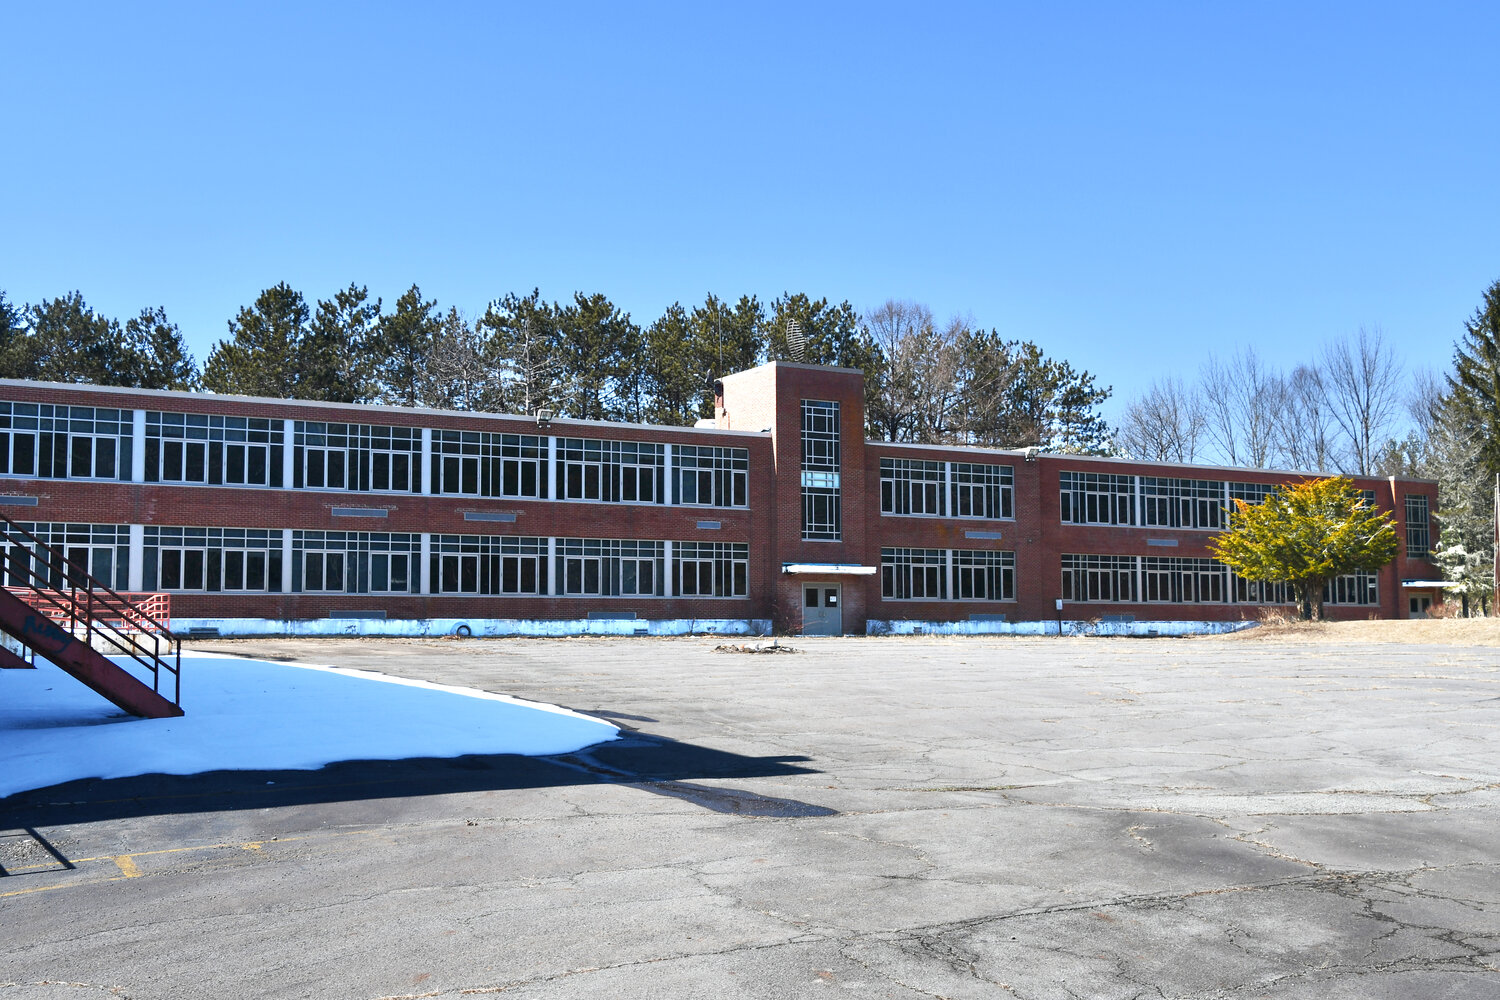 The former Delaware Valley School in Callicoon has been vacant more than a decade and no one appears to know much about what the future of the building is.